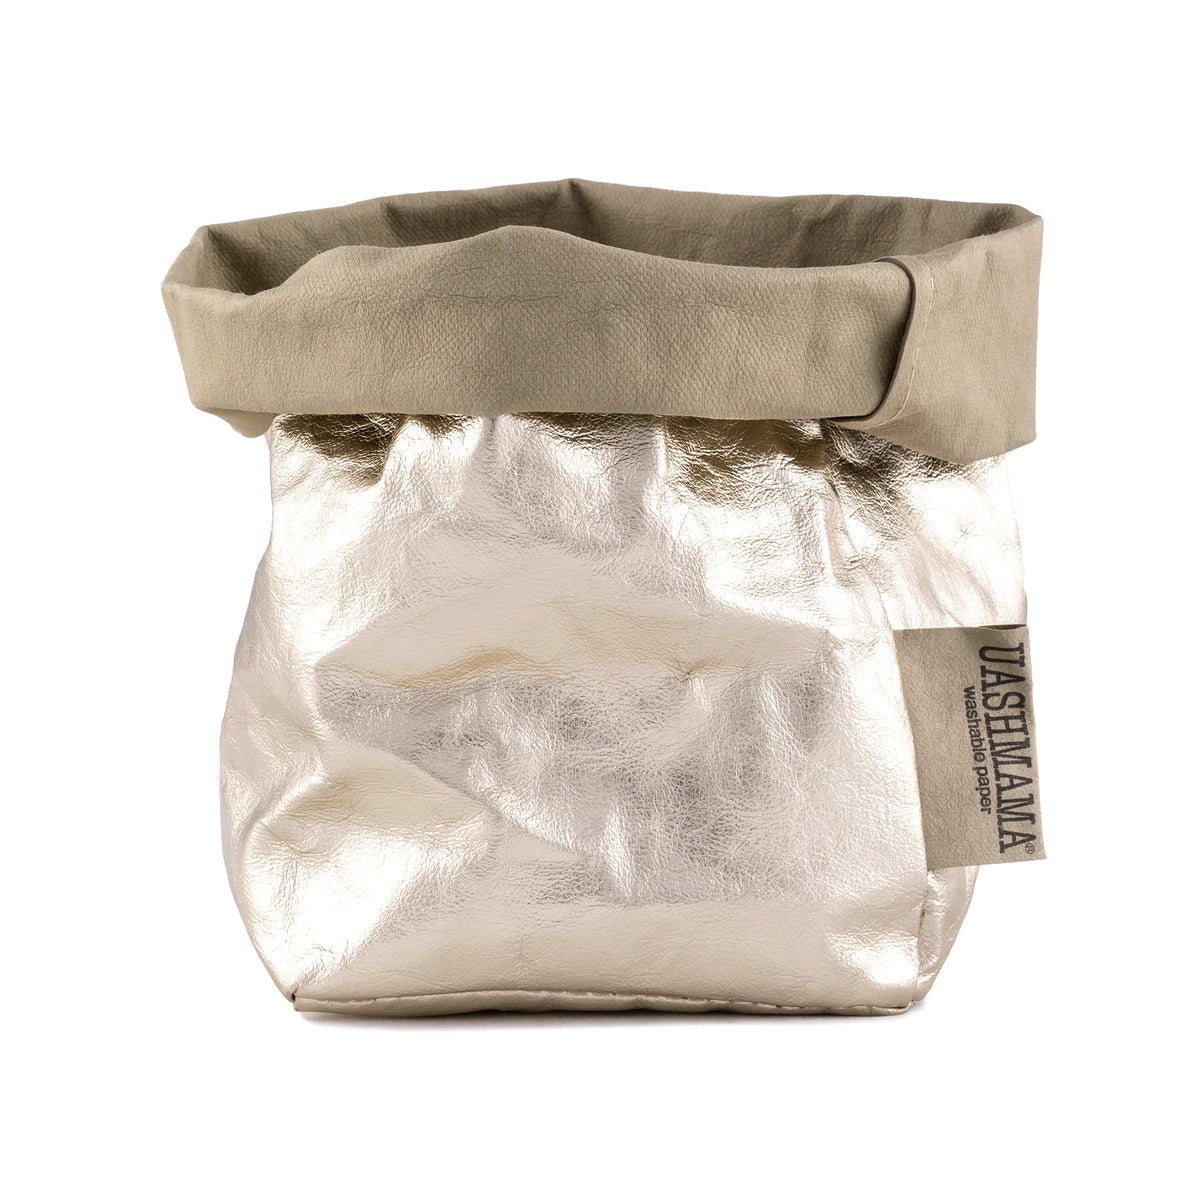 A washable paper bag is shown. The bag is rolled down at the top and features a UASHMAMA logo label on the bottom left corner. The bag pictured is the small size in metallic platinum.